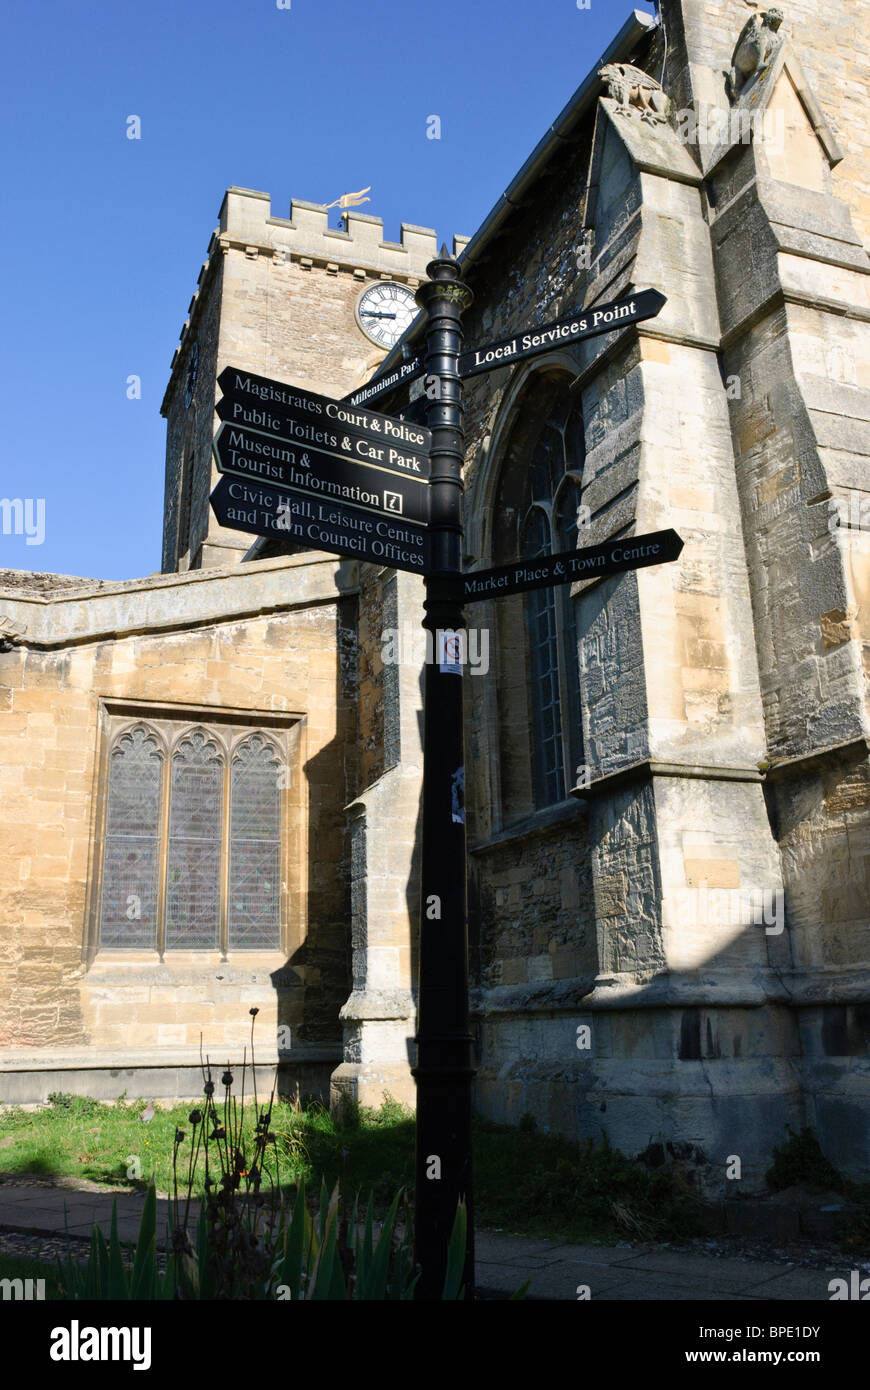 Sign giving directions in front of St. Peter and St. Paul's Church in the historic town of Wantage, Oxfordshire, England Stock Photo